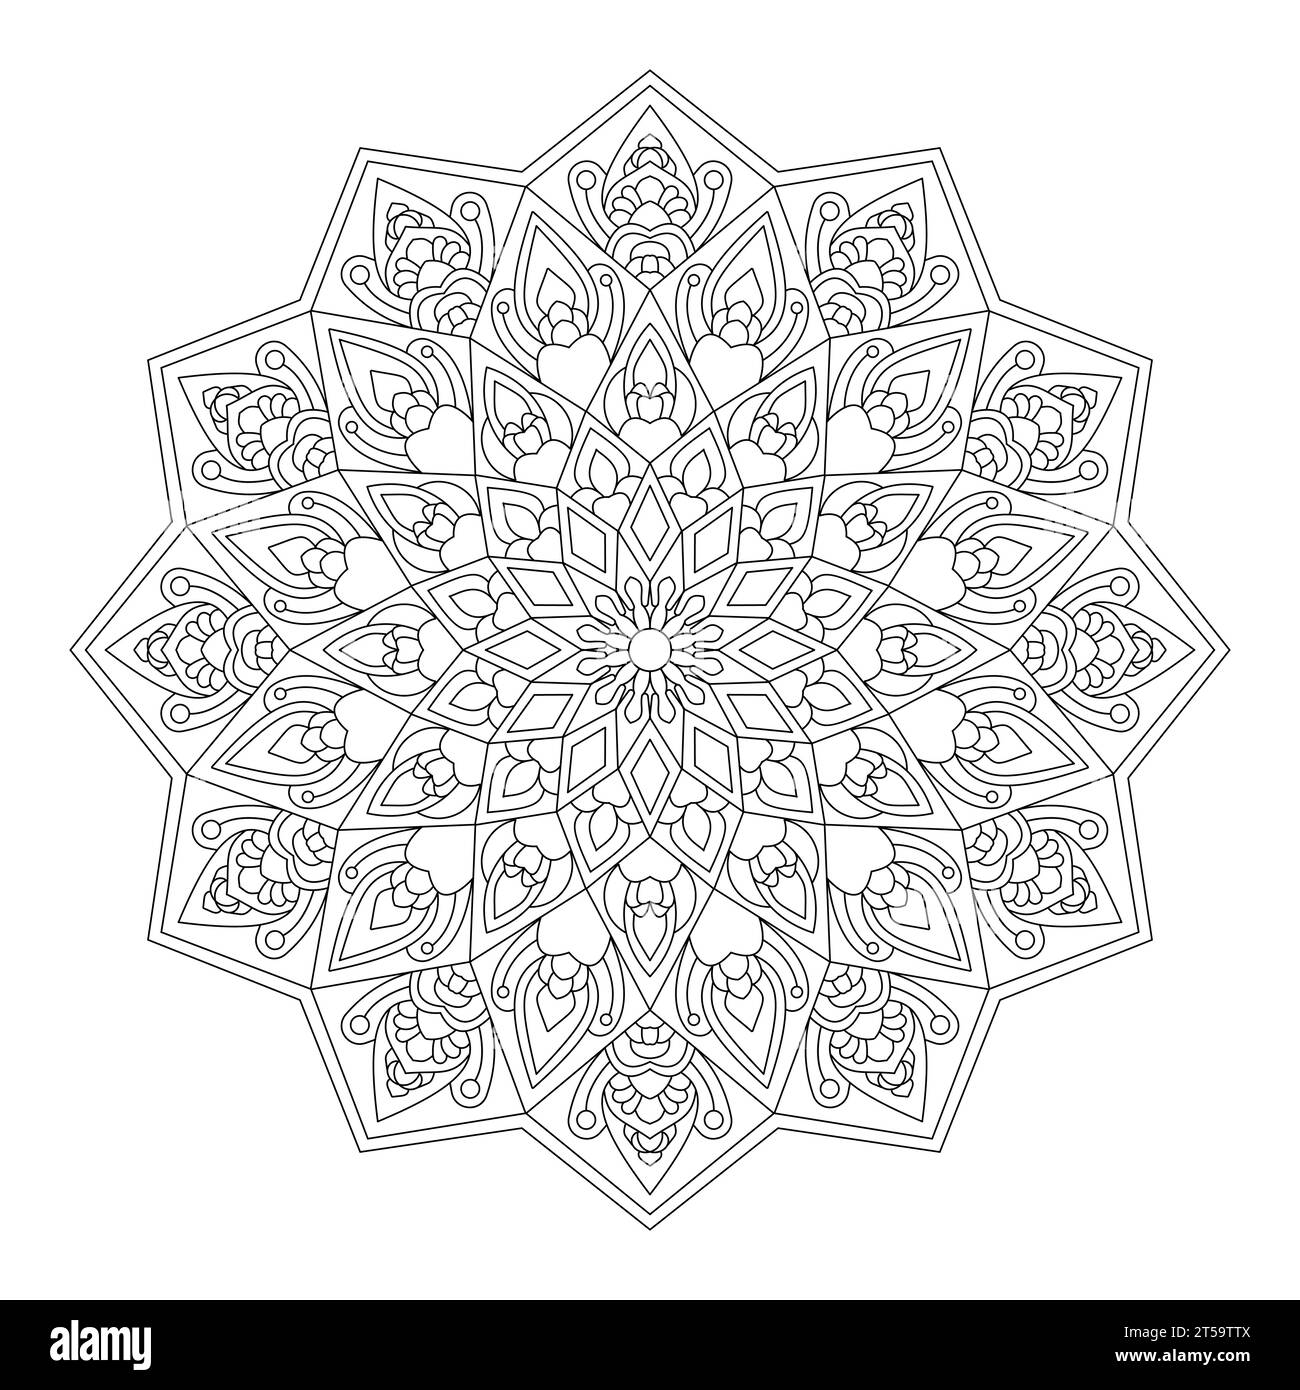 Adult Dreamcatcher Delight colouring book mandala page for KDP book interior. Peaceful Petals, Ability to Relax, Brain Experiences, Harmonious Haven, P Stock Vector